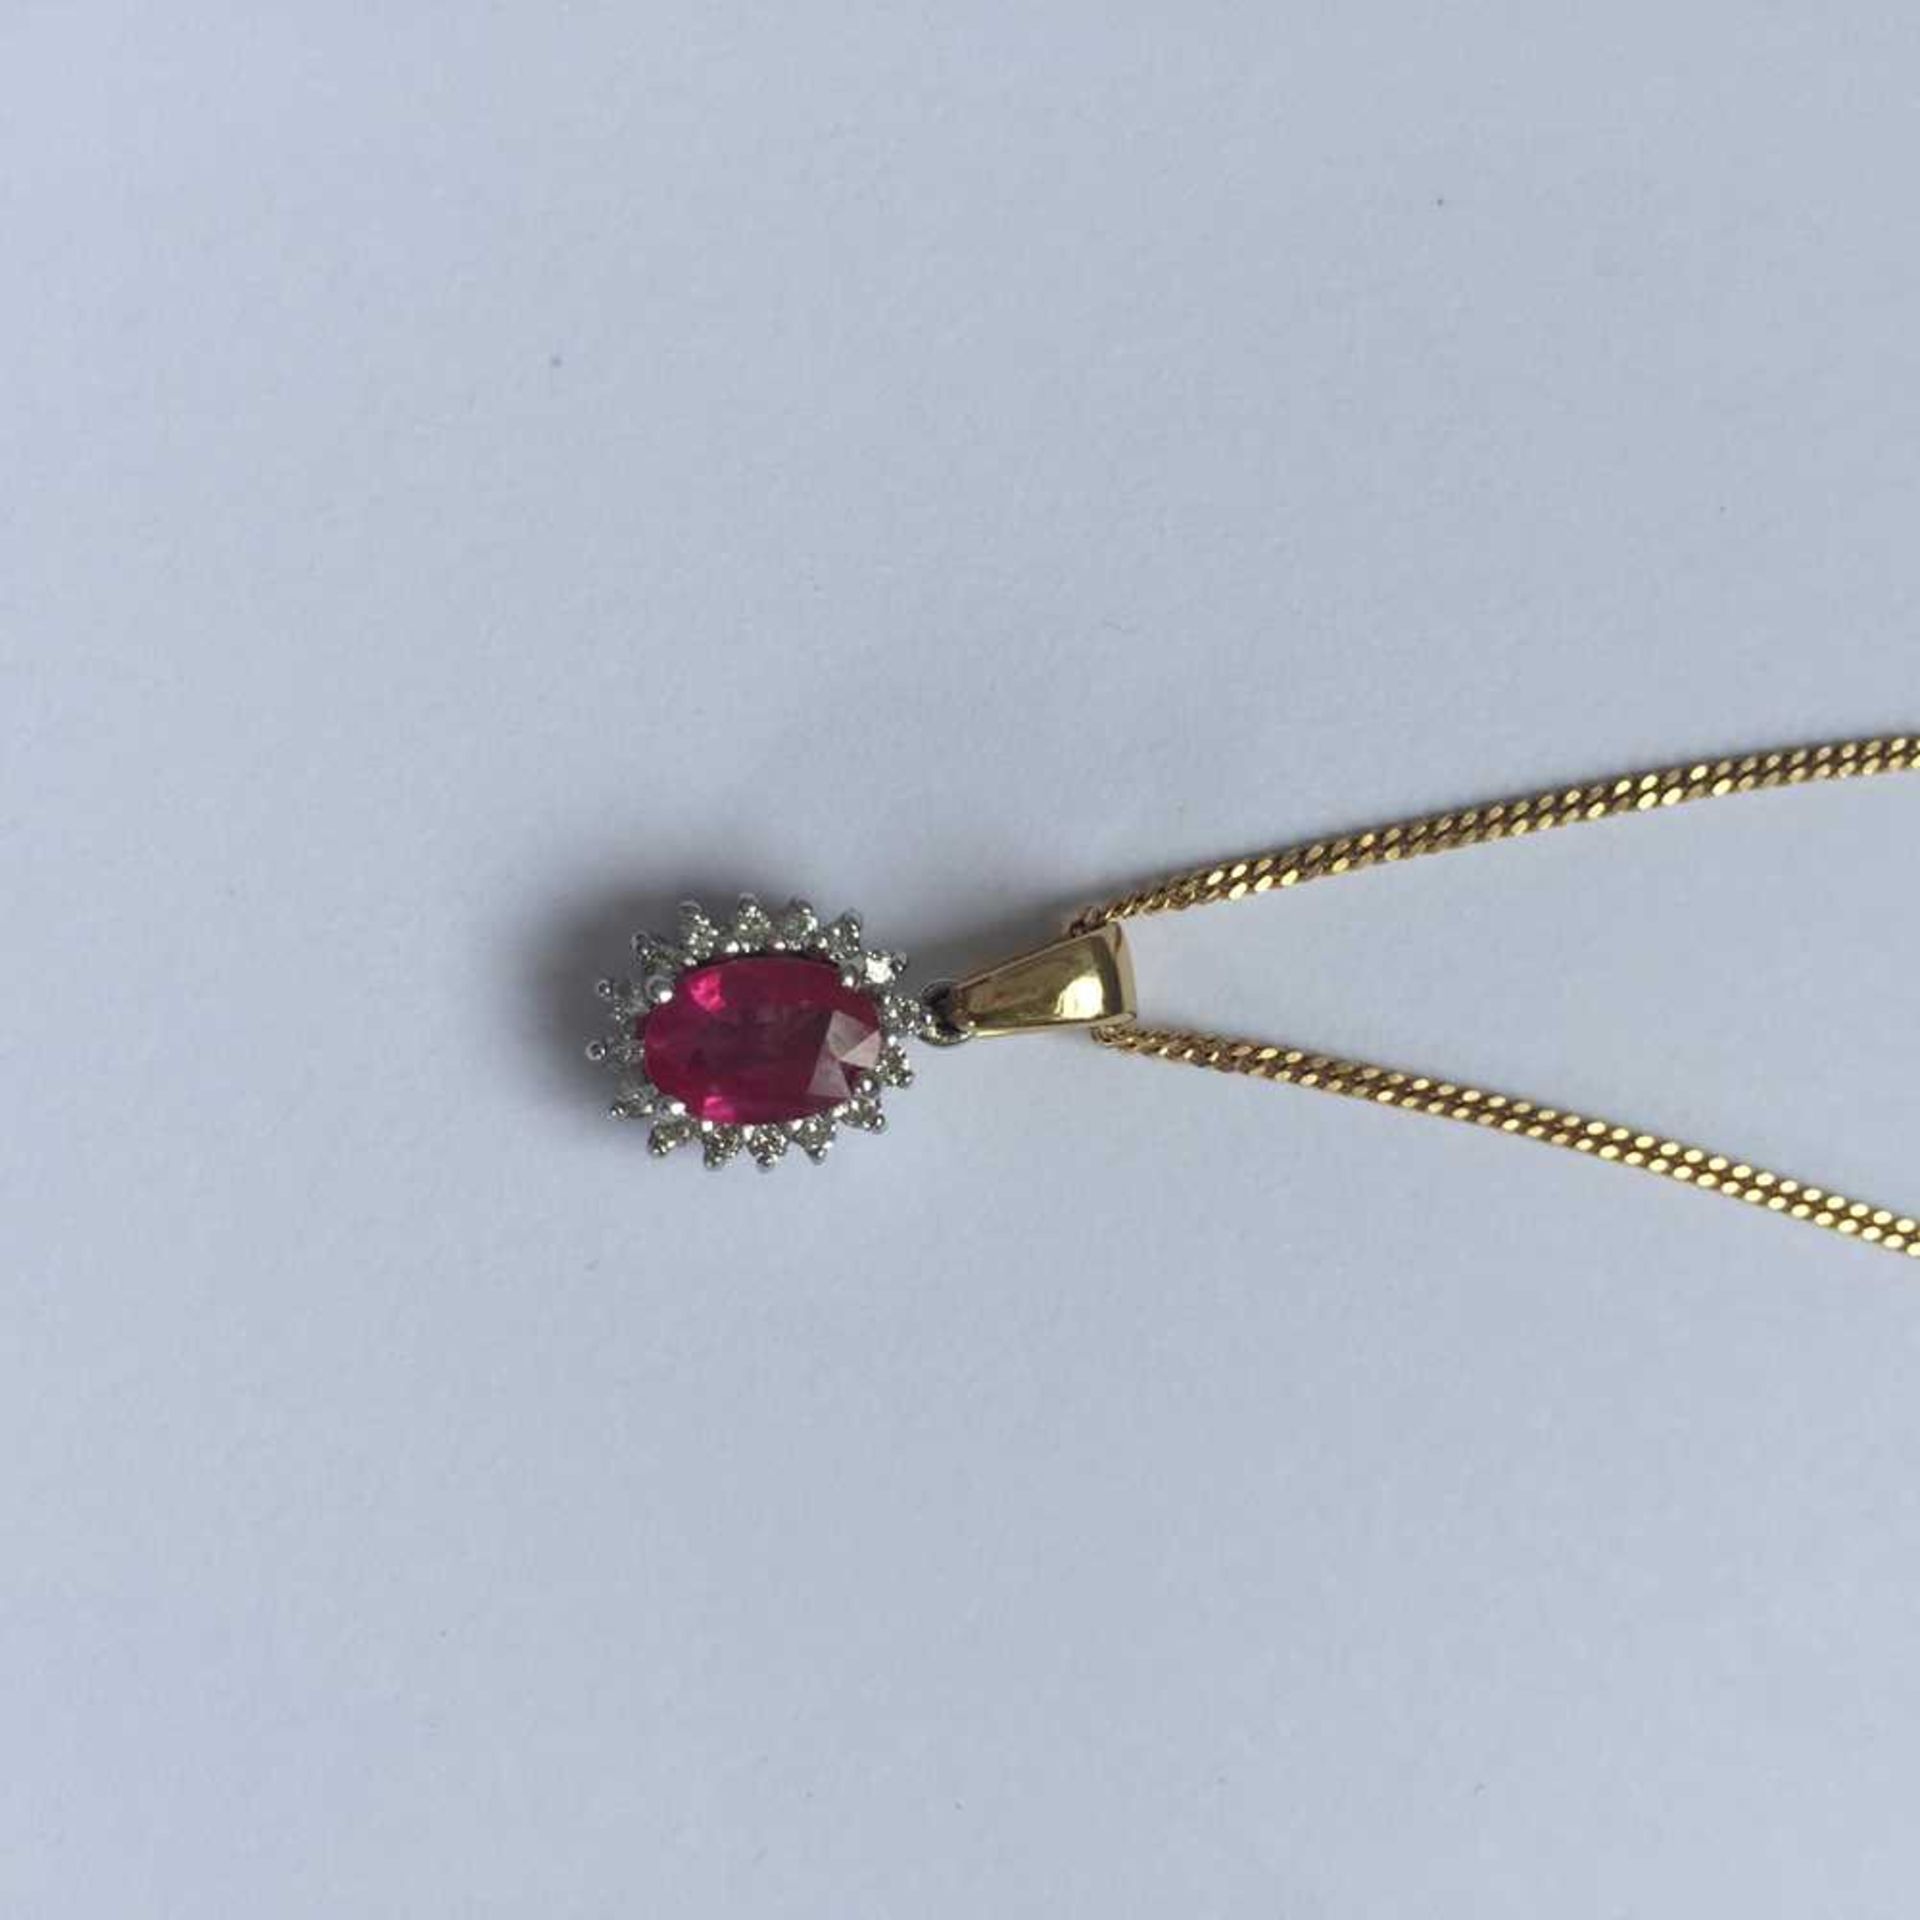 A pink sapphire and diamond pendant necklace - Image 9 of 17